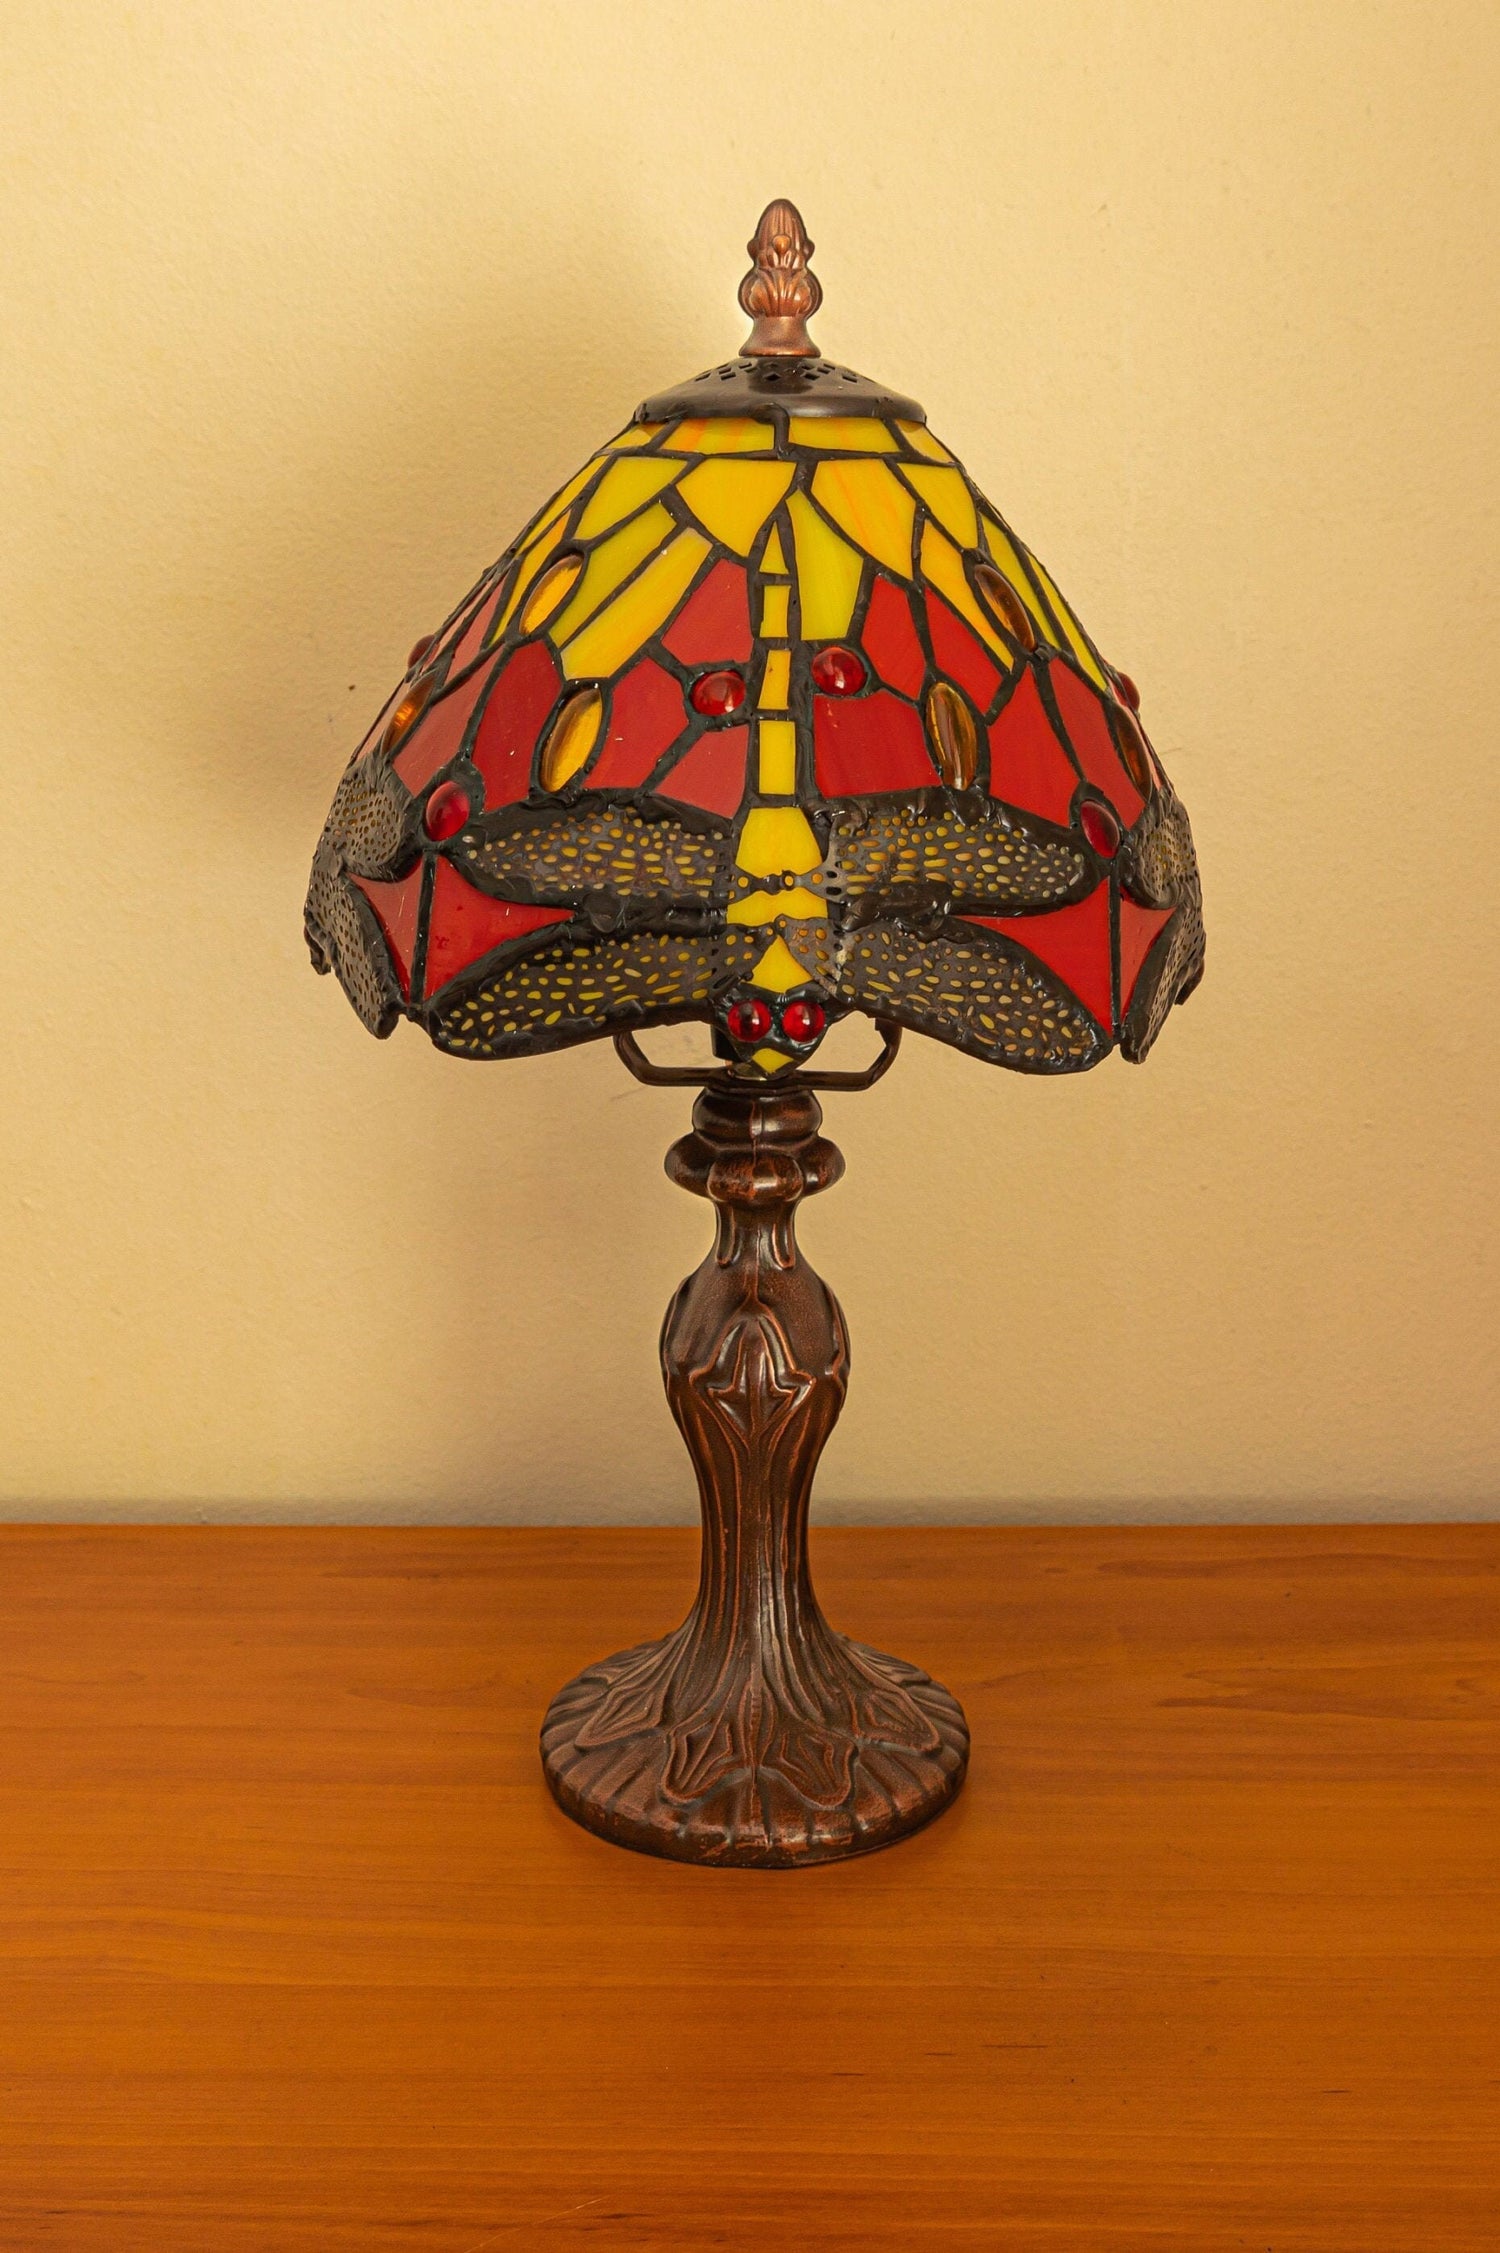 Tiffany Lamp, Leadglass Lamp, Stained Glass Shade, Crystal Bead Lamp Shade, Antique Lampshade, Stained Glass Lamp Shade, Bedside Lamp, Red S